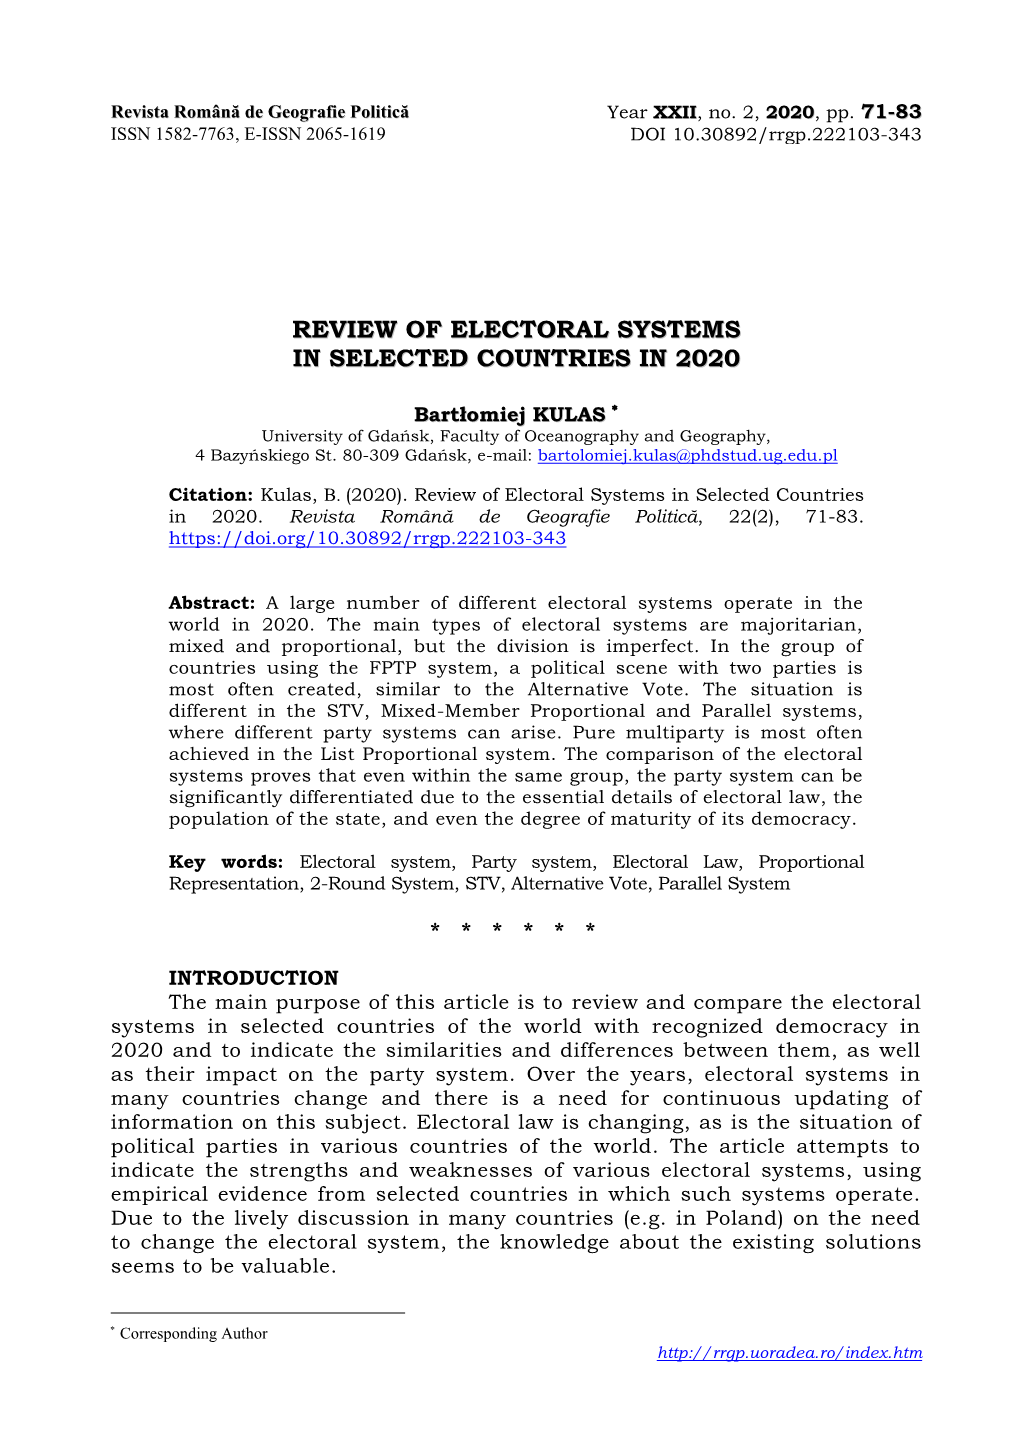 Review of Electoral Systems in Selected Countries in 2020